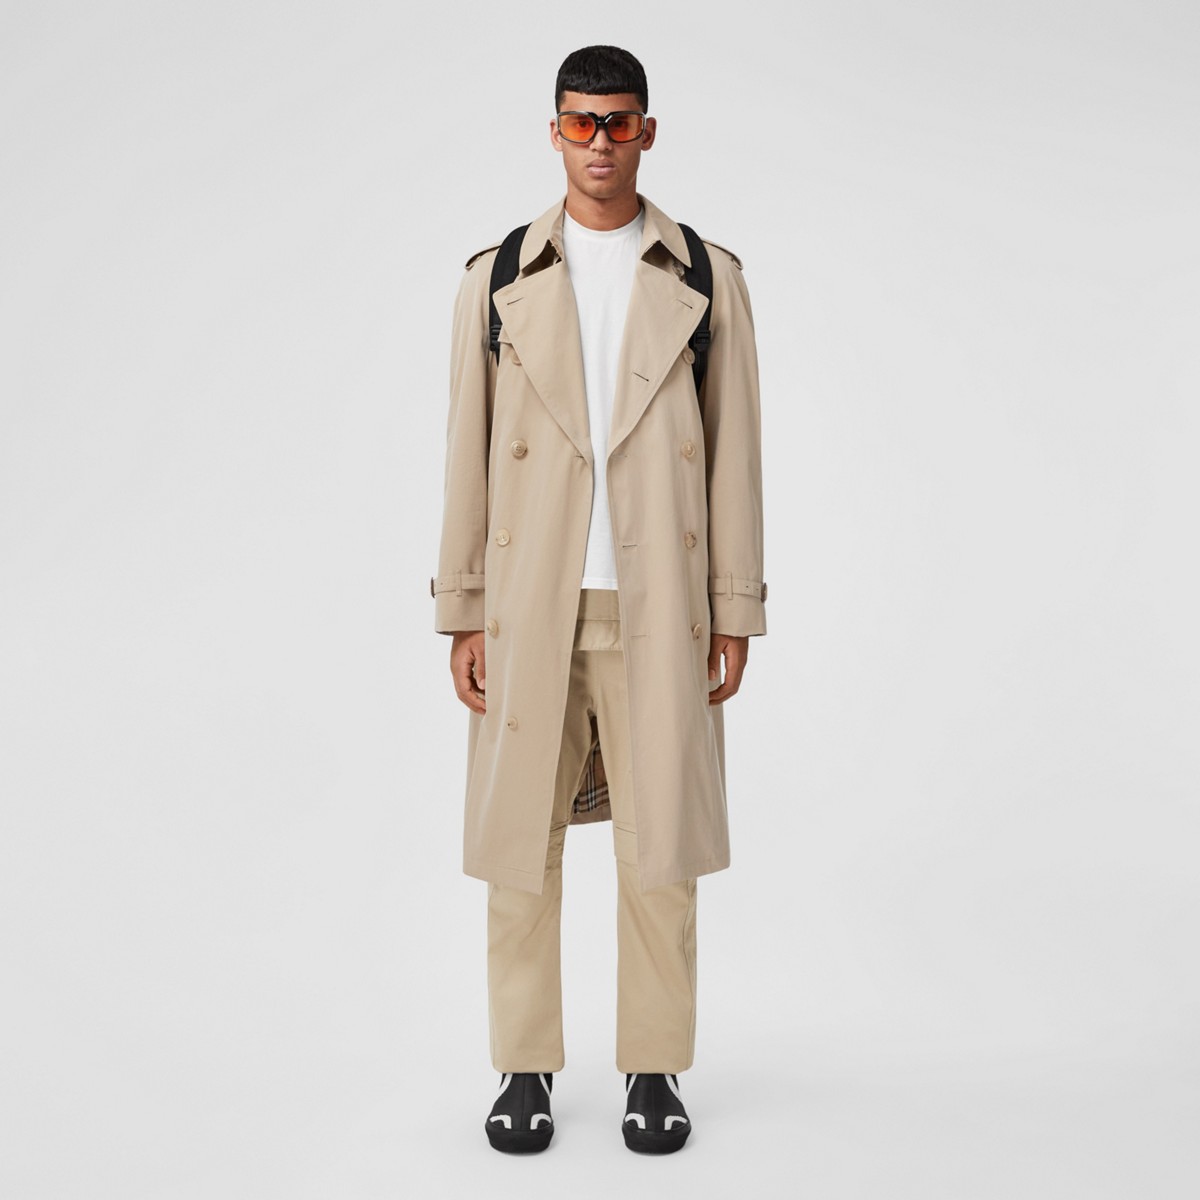 Burberry The Westminster Heritage Trench Coat, Beige